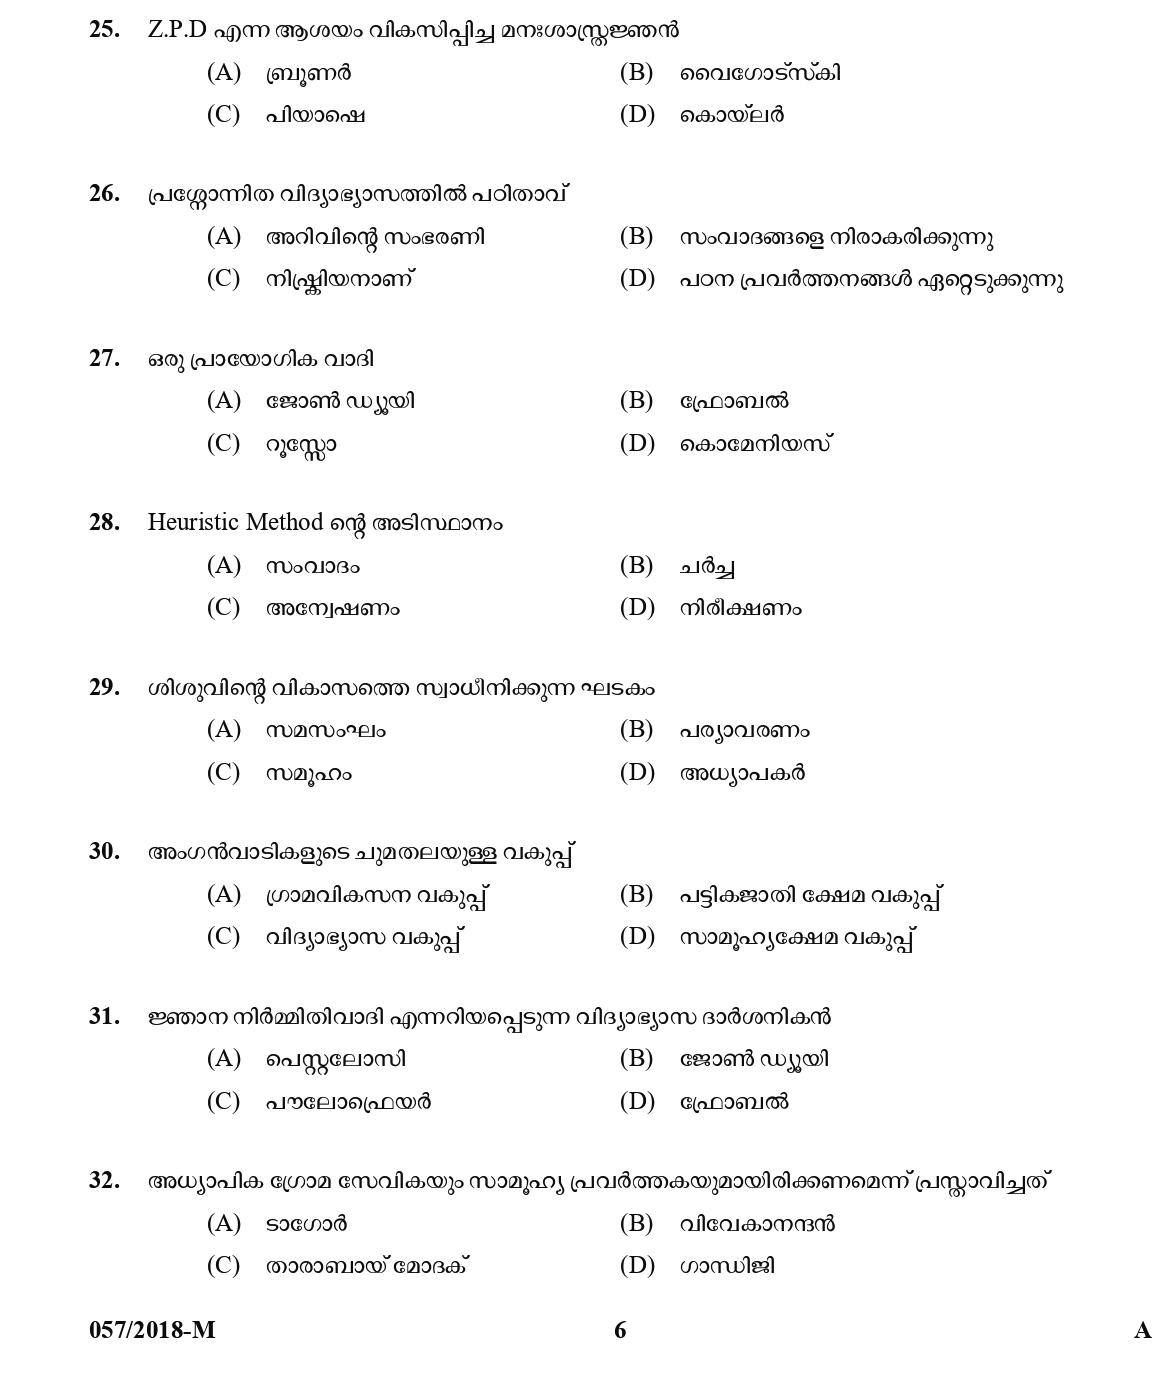 https://www.pscthriller.com/2019/07/kerala-psc-previous-question-papers-with-answer-key.html